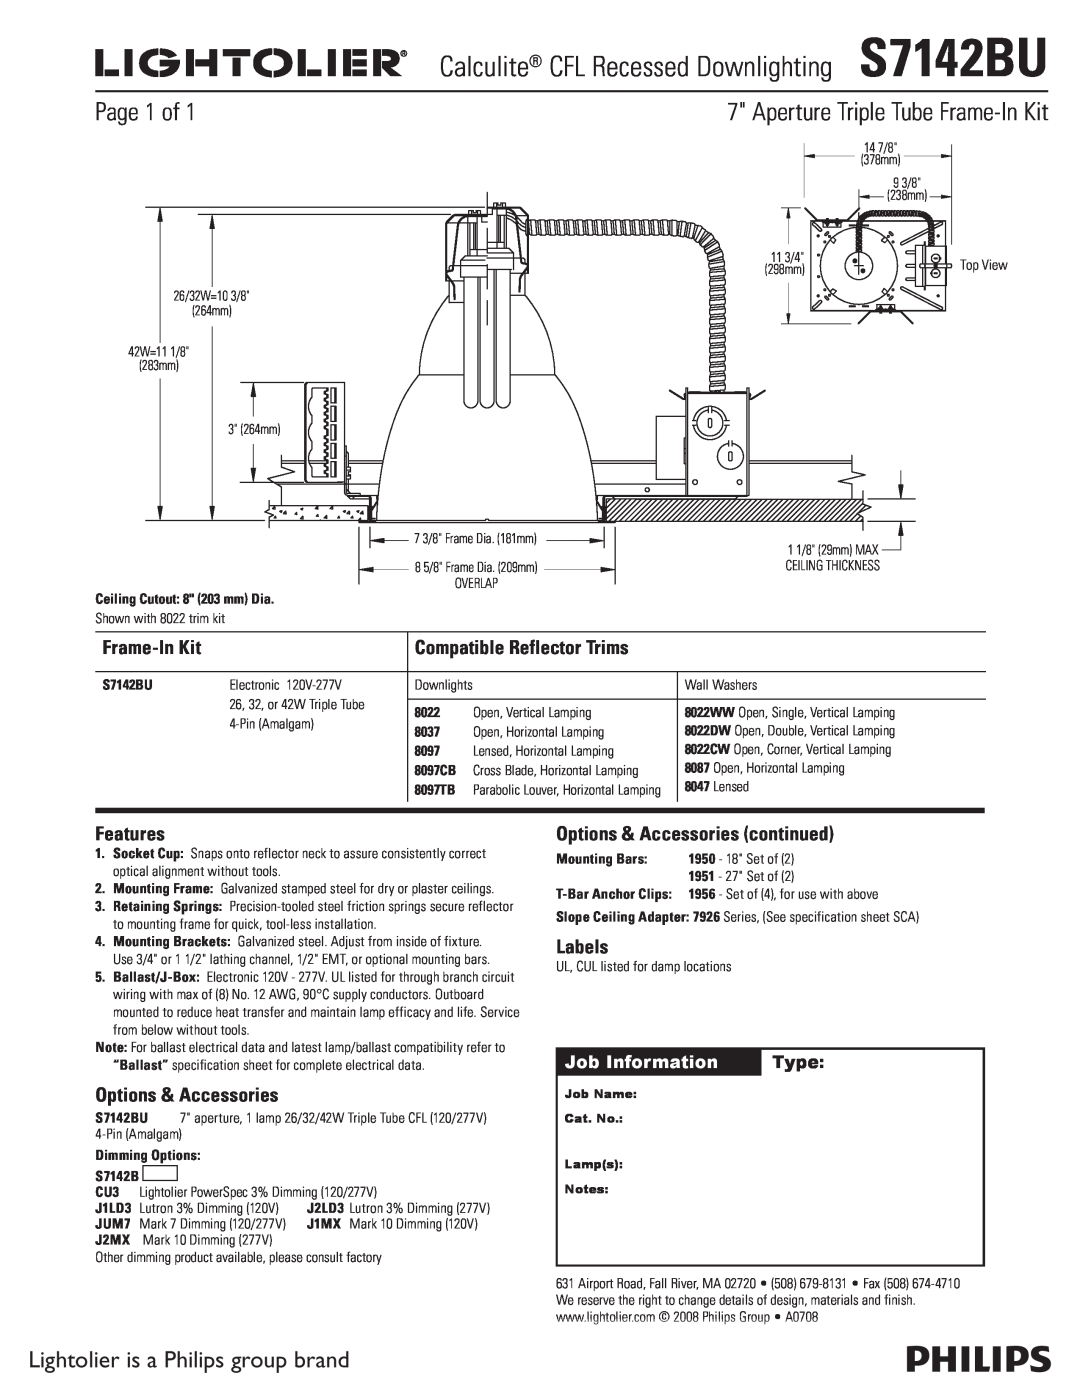 Lightolier S7142BU specifications Page 1 of, Lightolier is a Philips group brand, Aperture Triple Tube Frame-In Kit, Type 